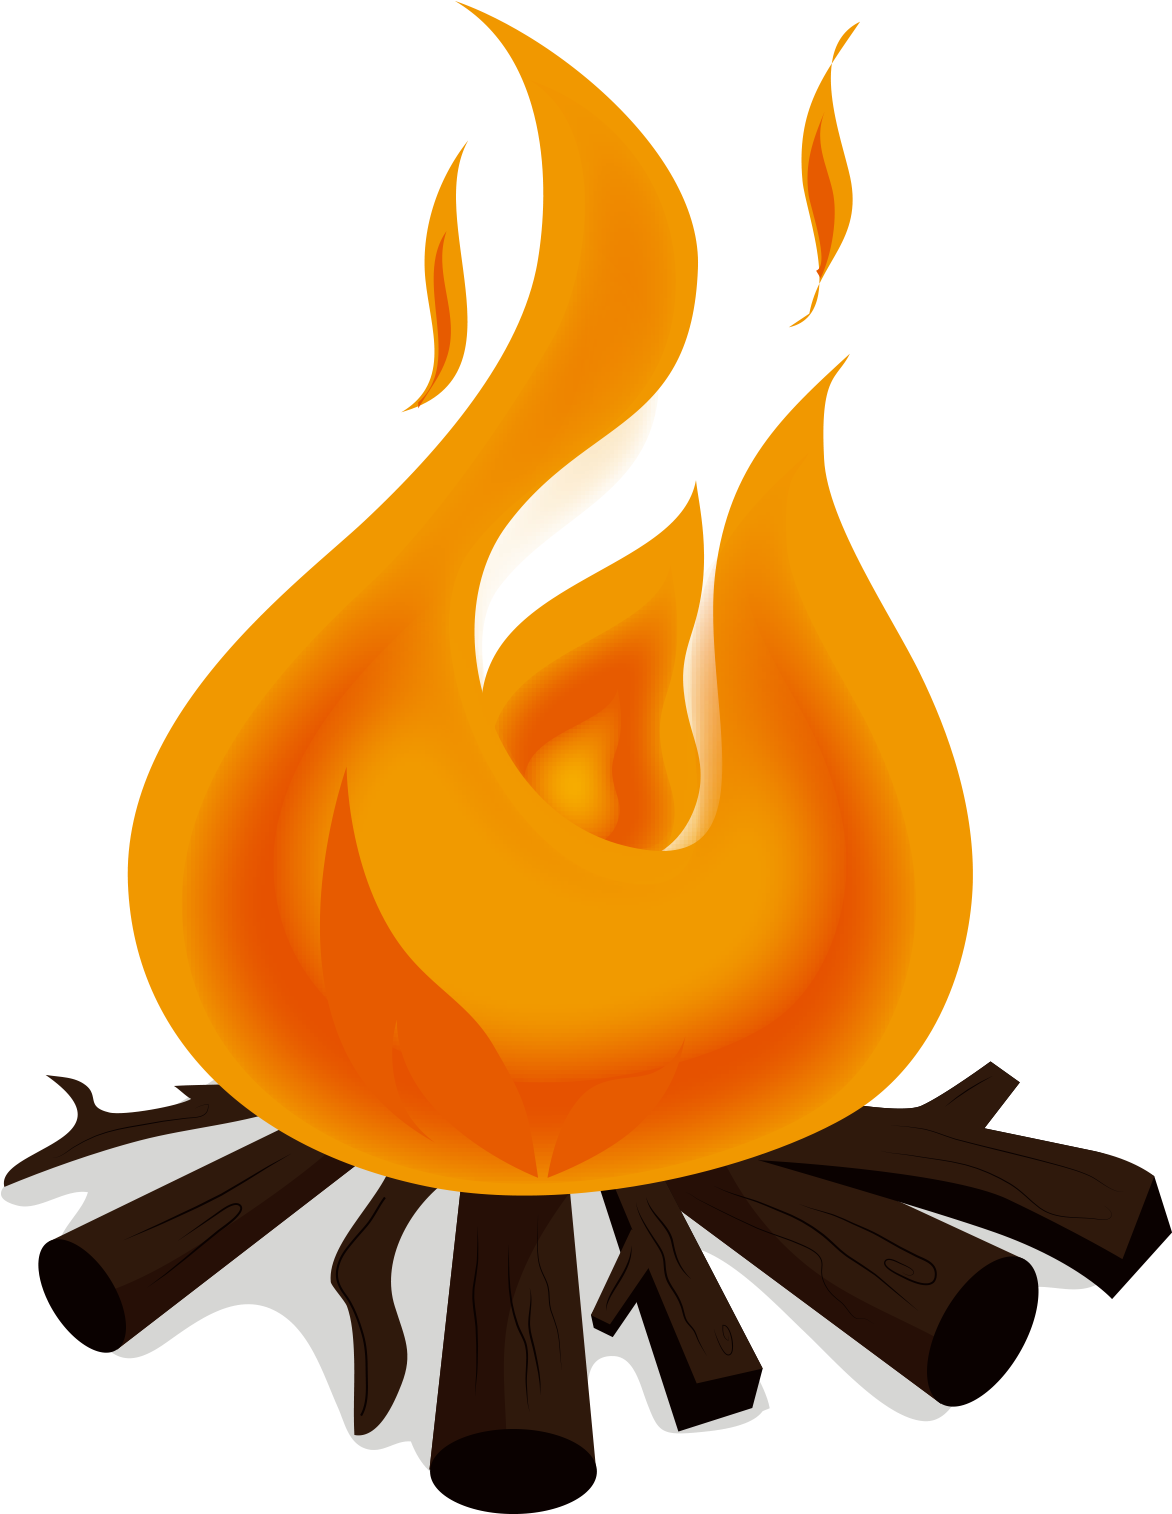 Vector Wood Campfire Free Clipart HQ PNG Image